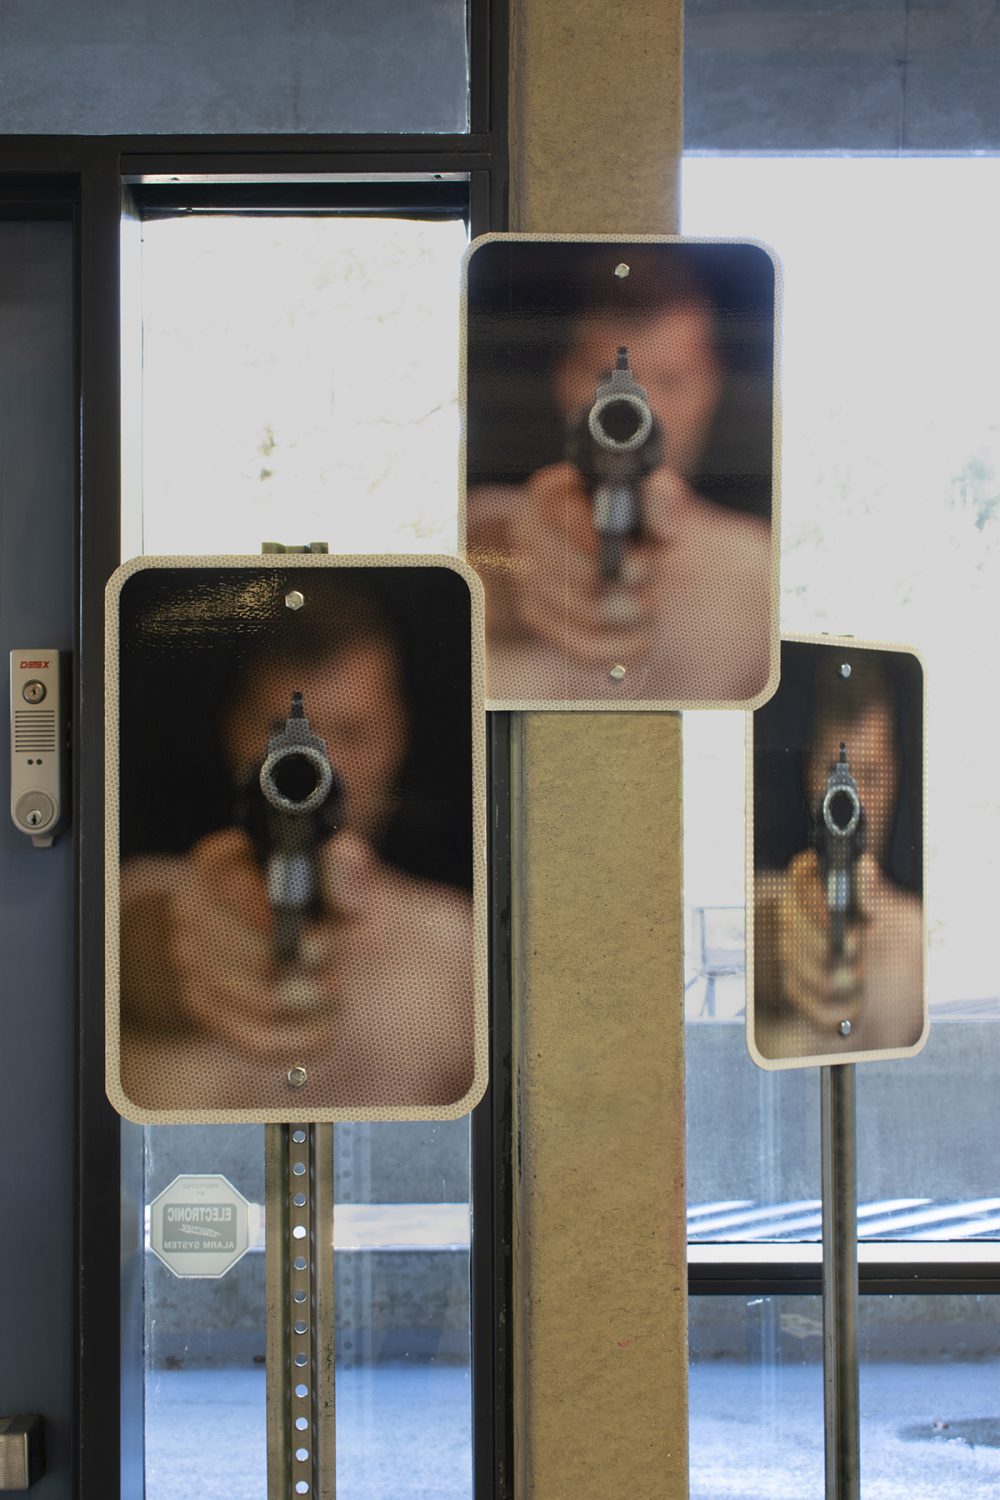 Three identical signs are in the foreground, each depicting the upper body of a man holding a large gun that is pointed at the viewer. In the background are floor to ceiling glass windows with a grey door with a lock on the right,and a concrete column at the center.